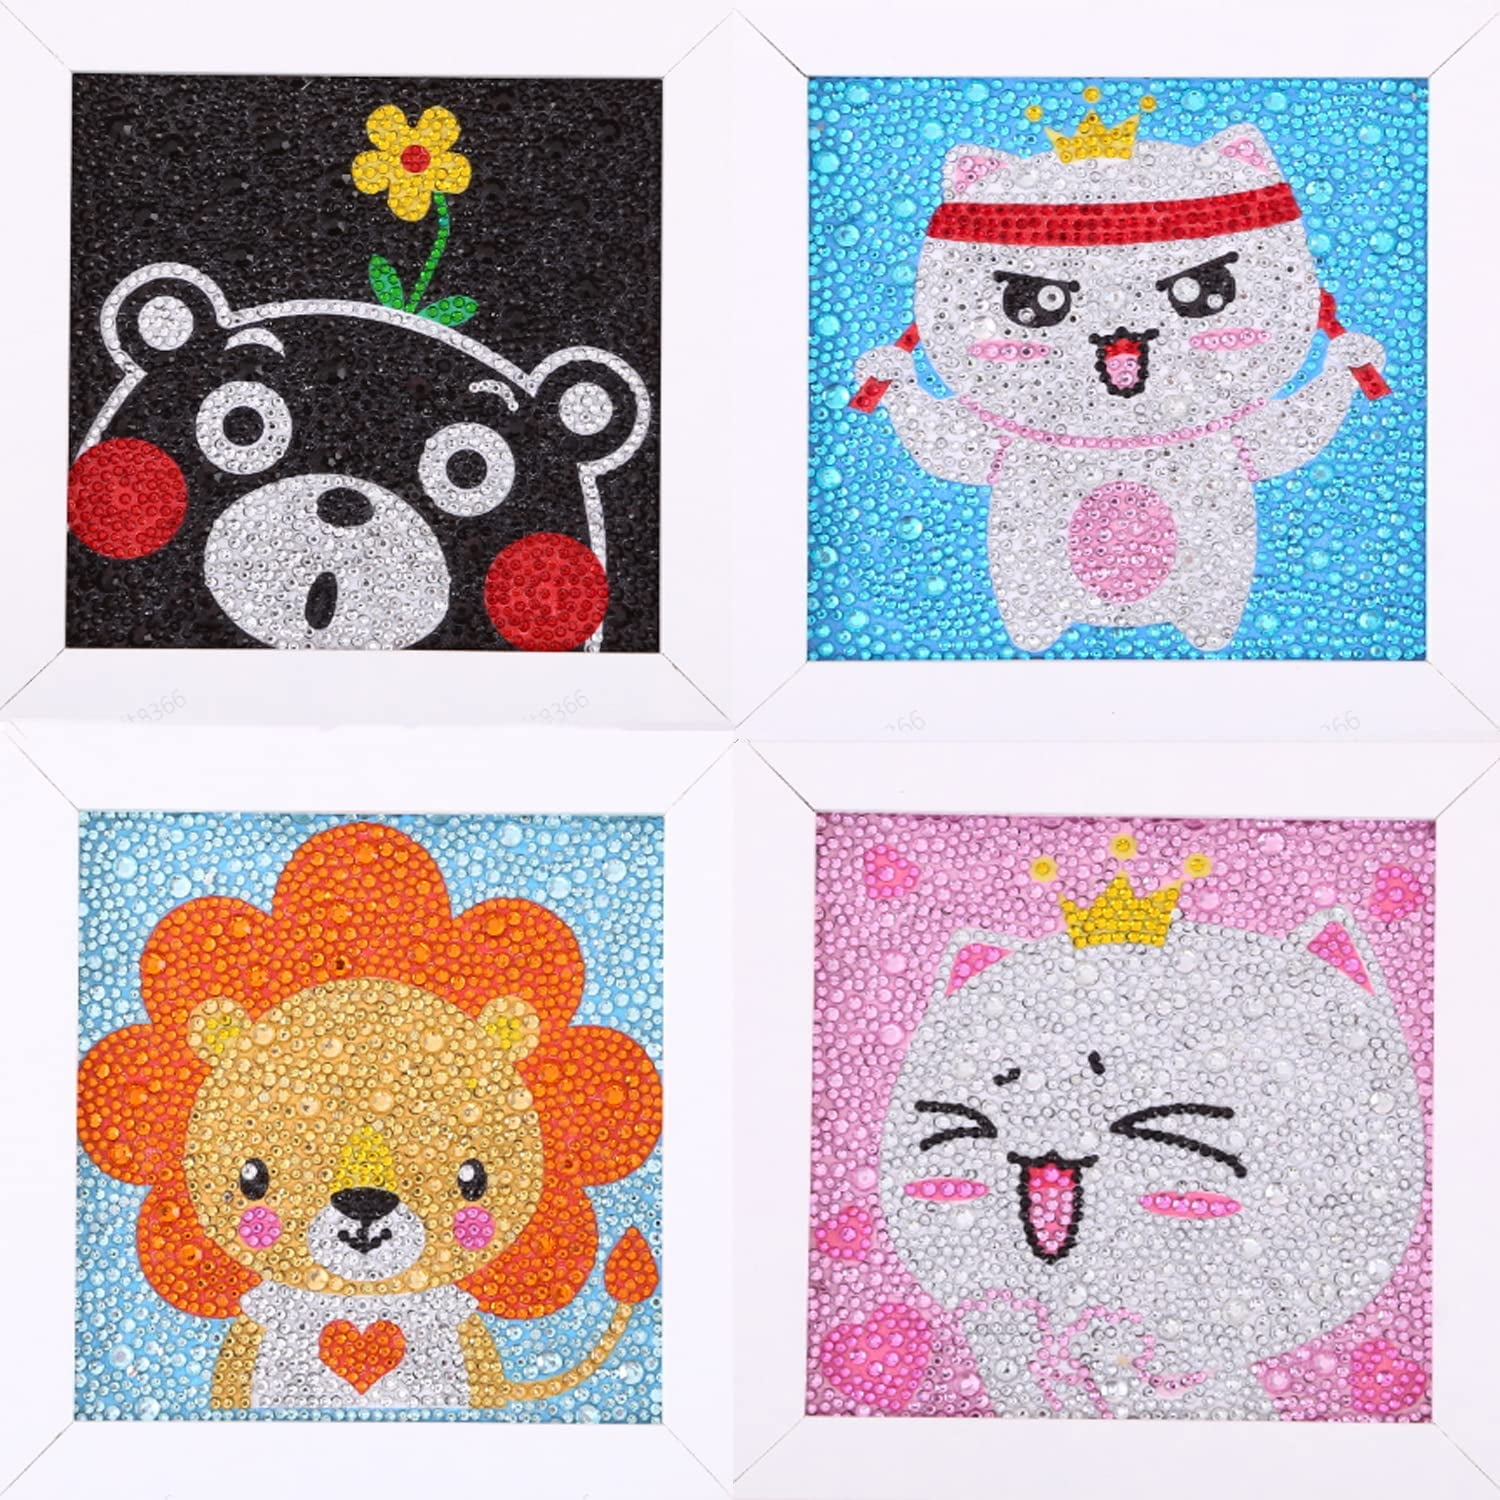 Maydear Small DIY 5d Diamond Painting Kits with Frame for Kids 4.7×4.7 inch